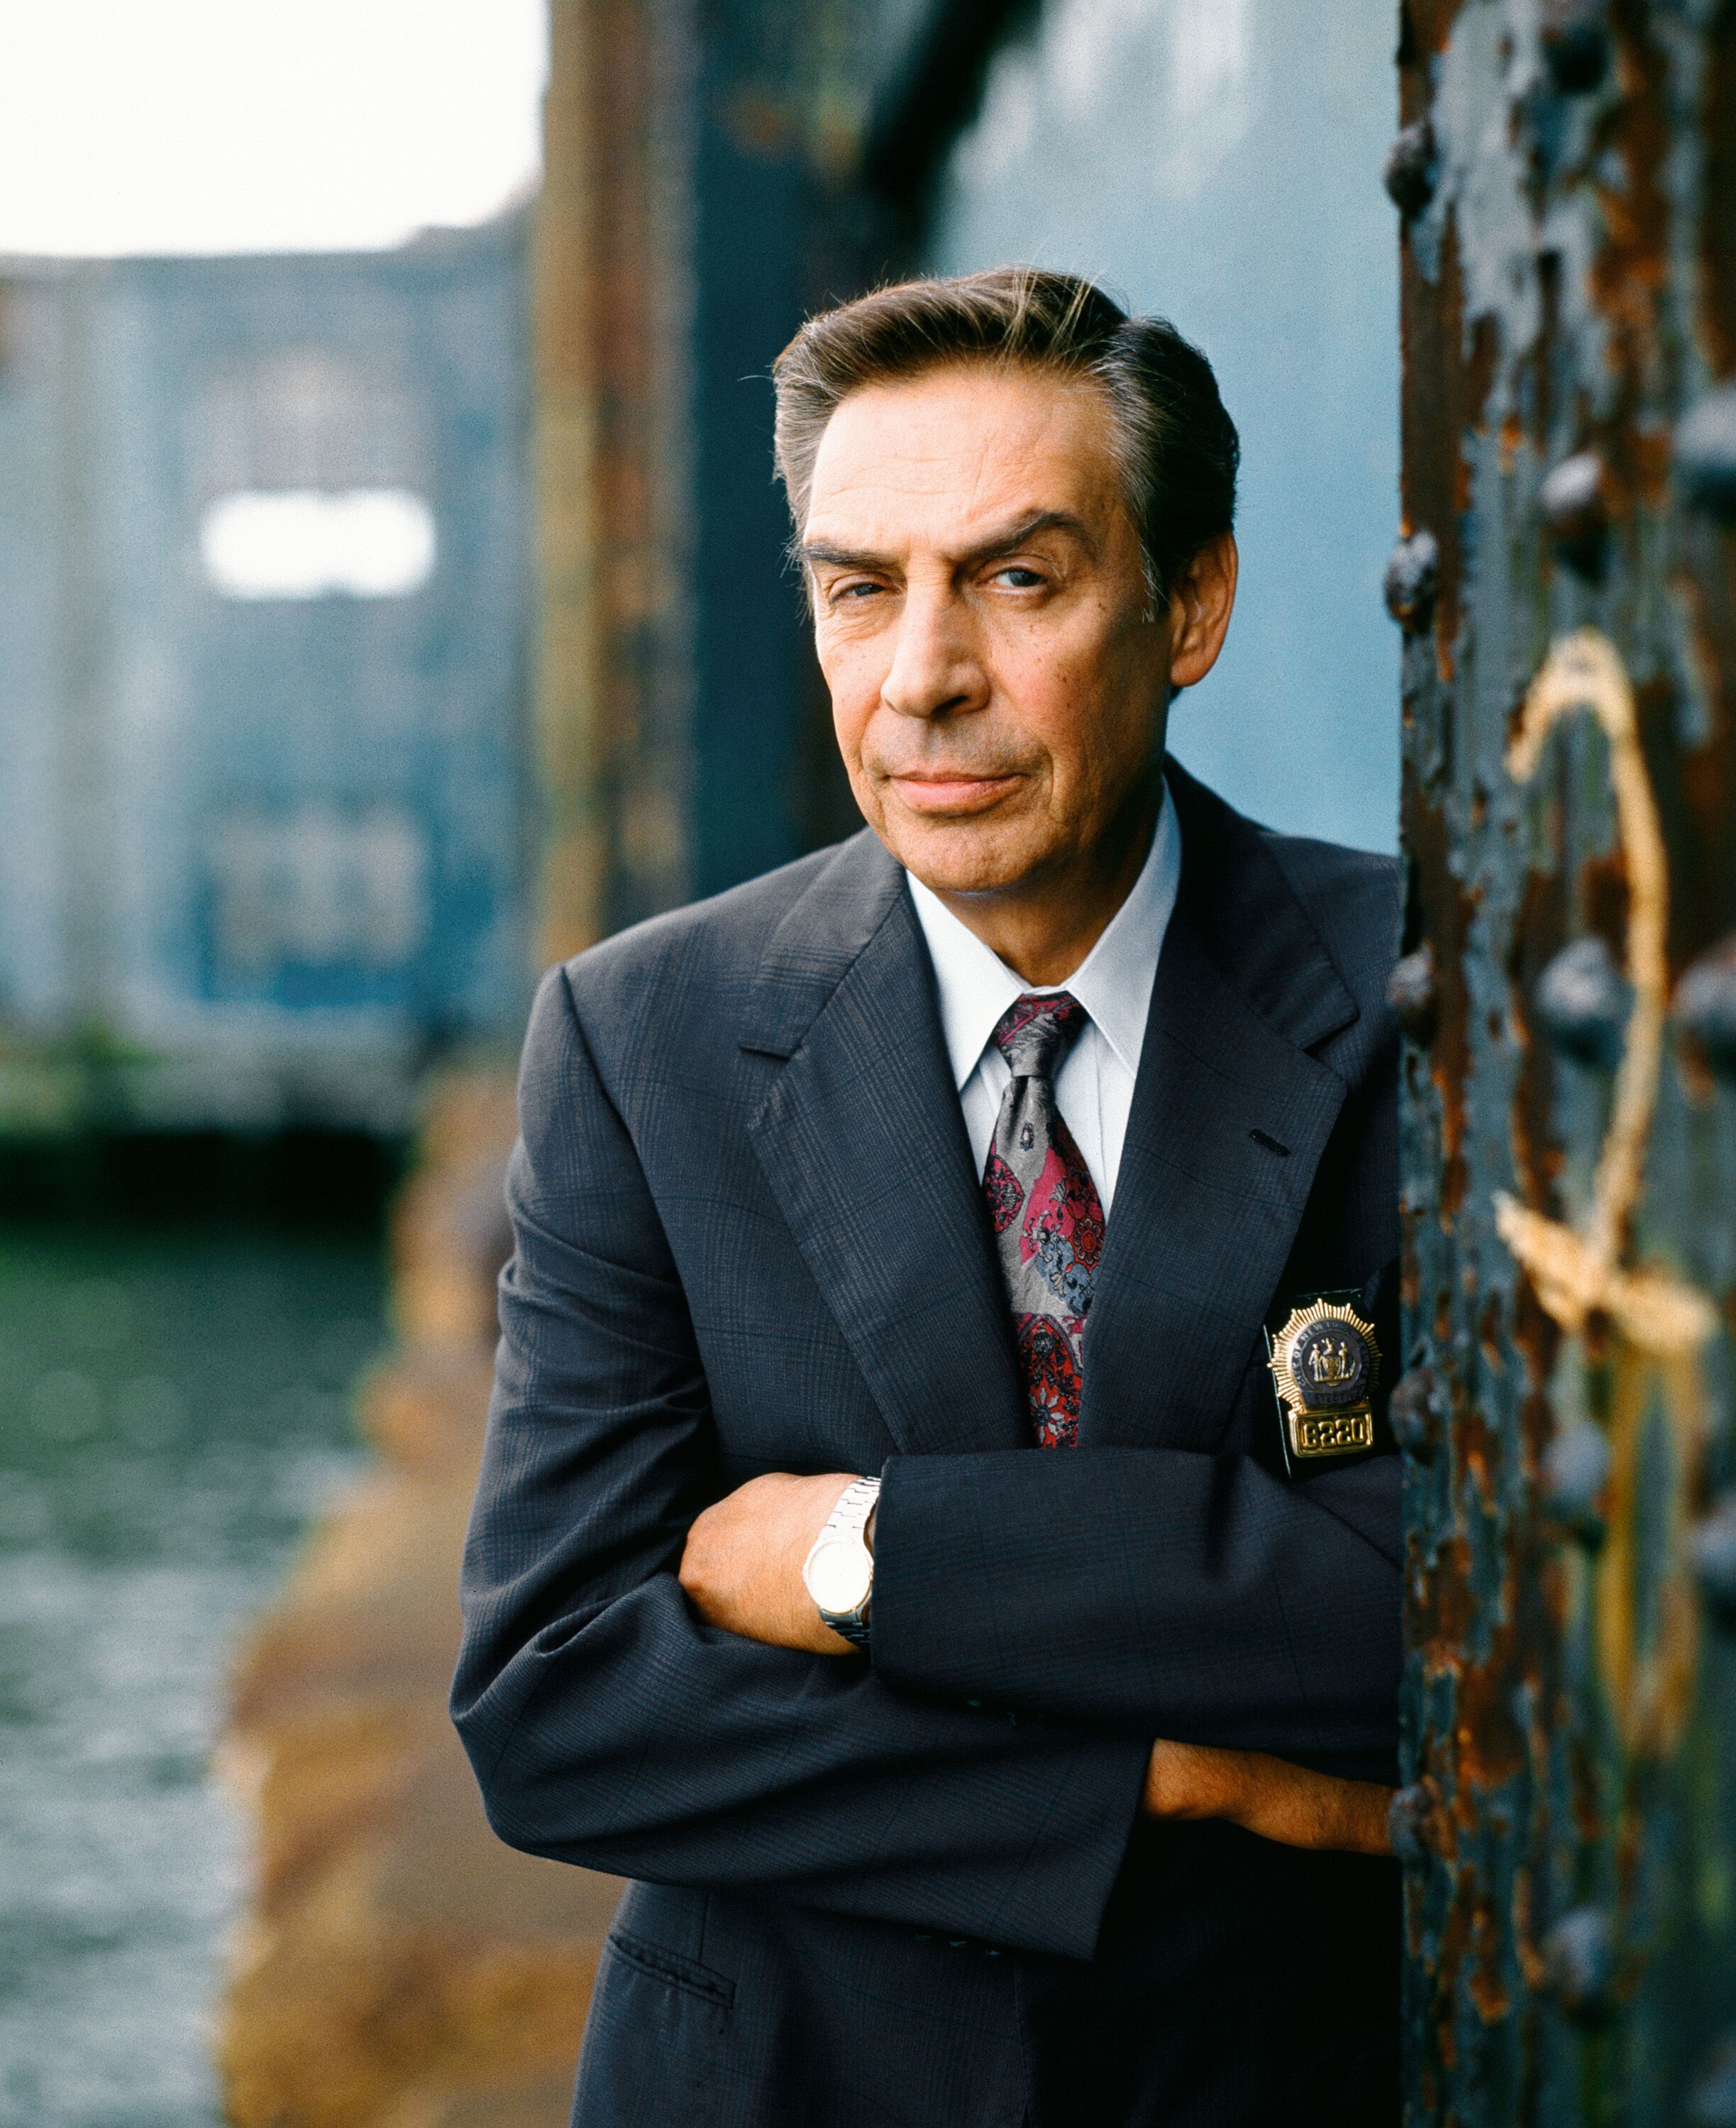 Jerry Orbach in a promotional shoot for TV series "Law & Order" | Photo: Getty Images